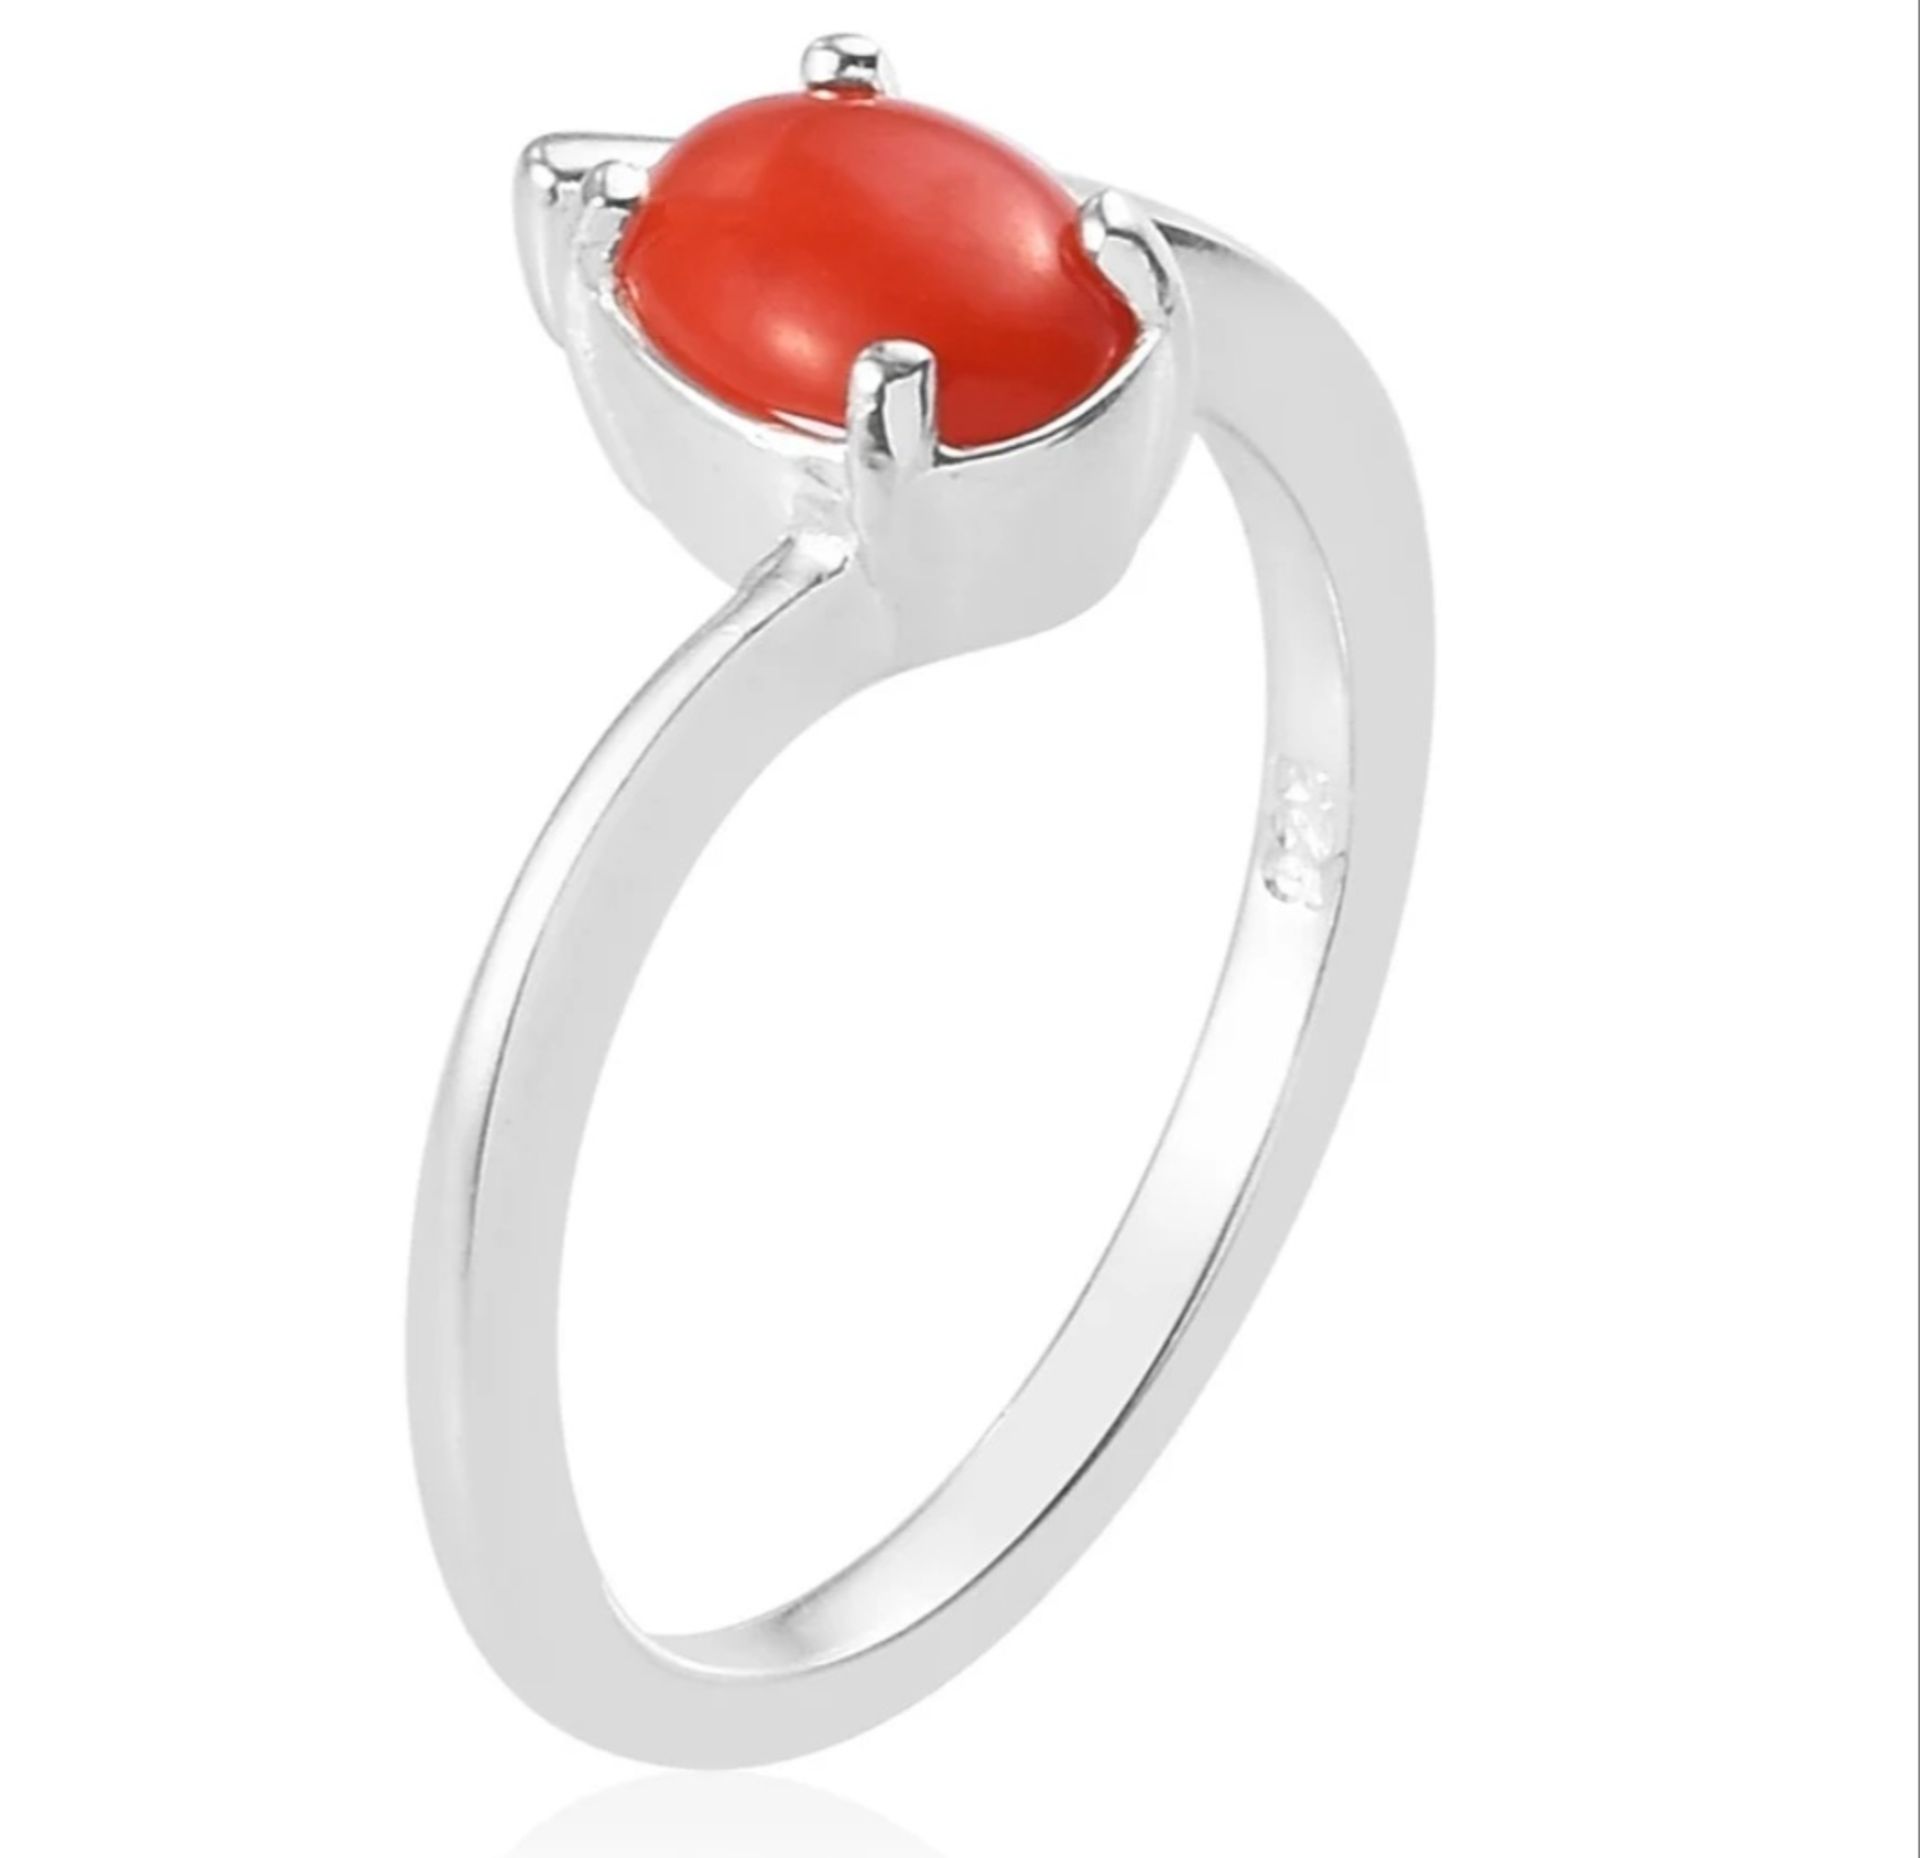 NEW!! Natural Coral Ring & Earrings in Sterling Silver - Image 2 of 6